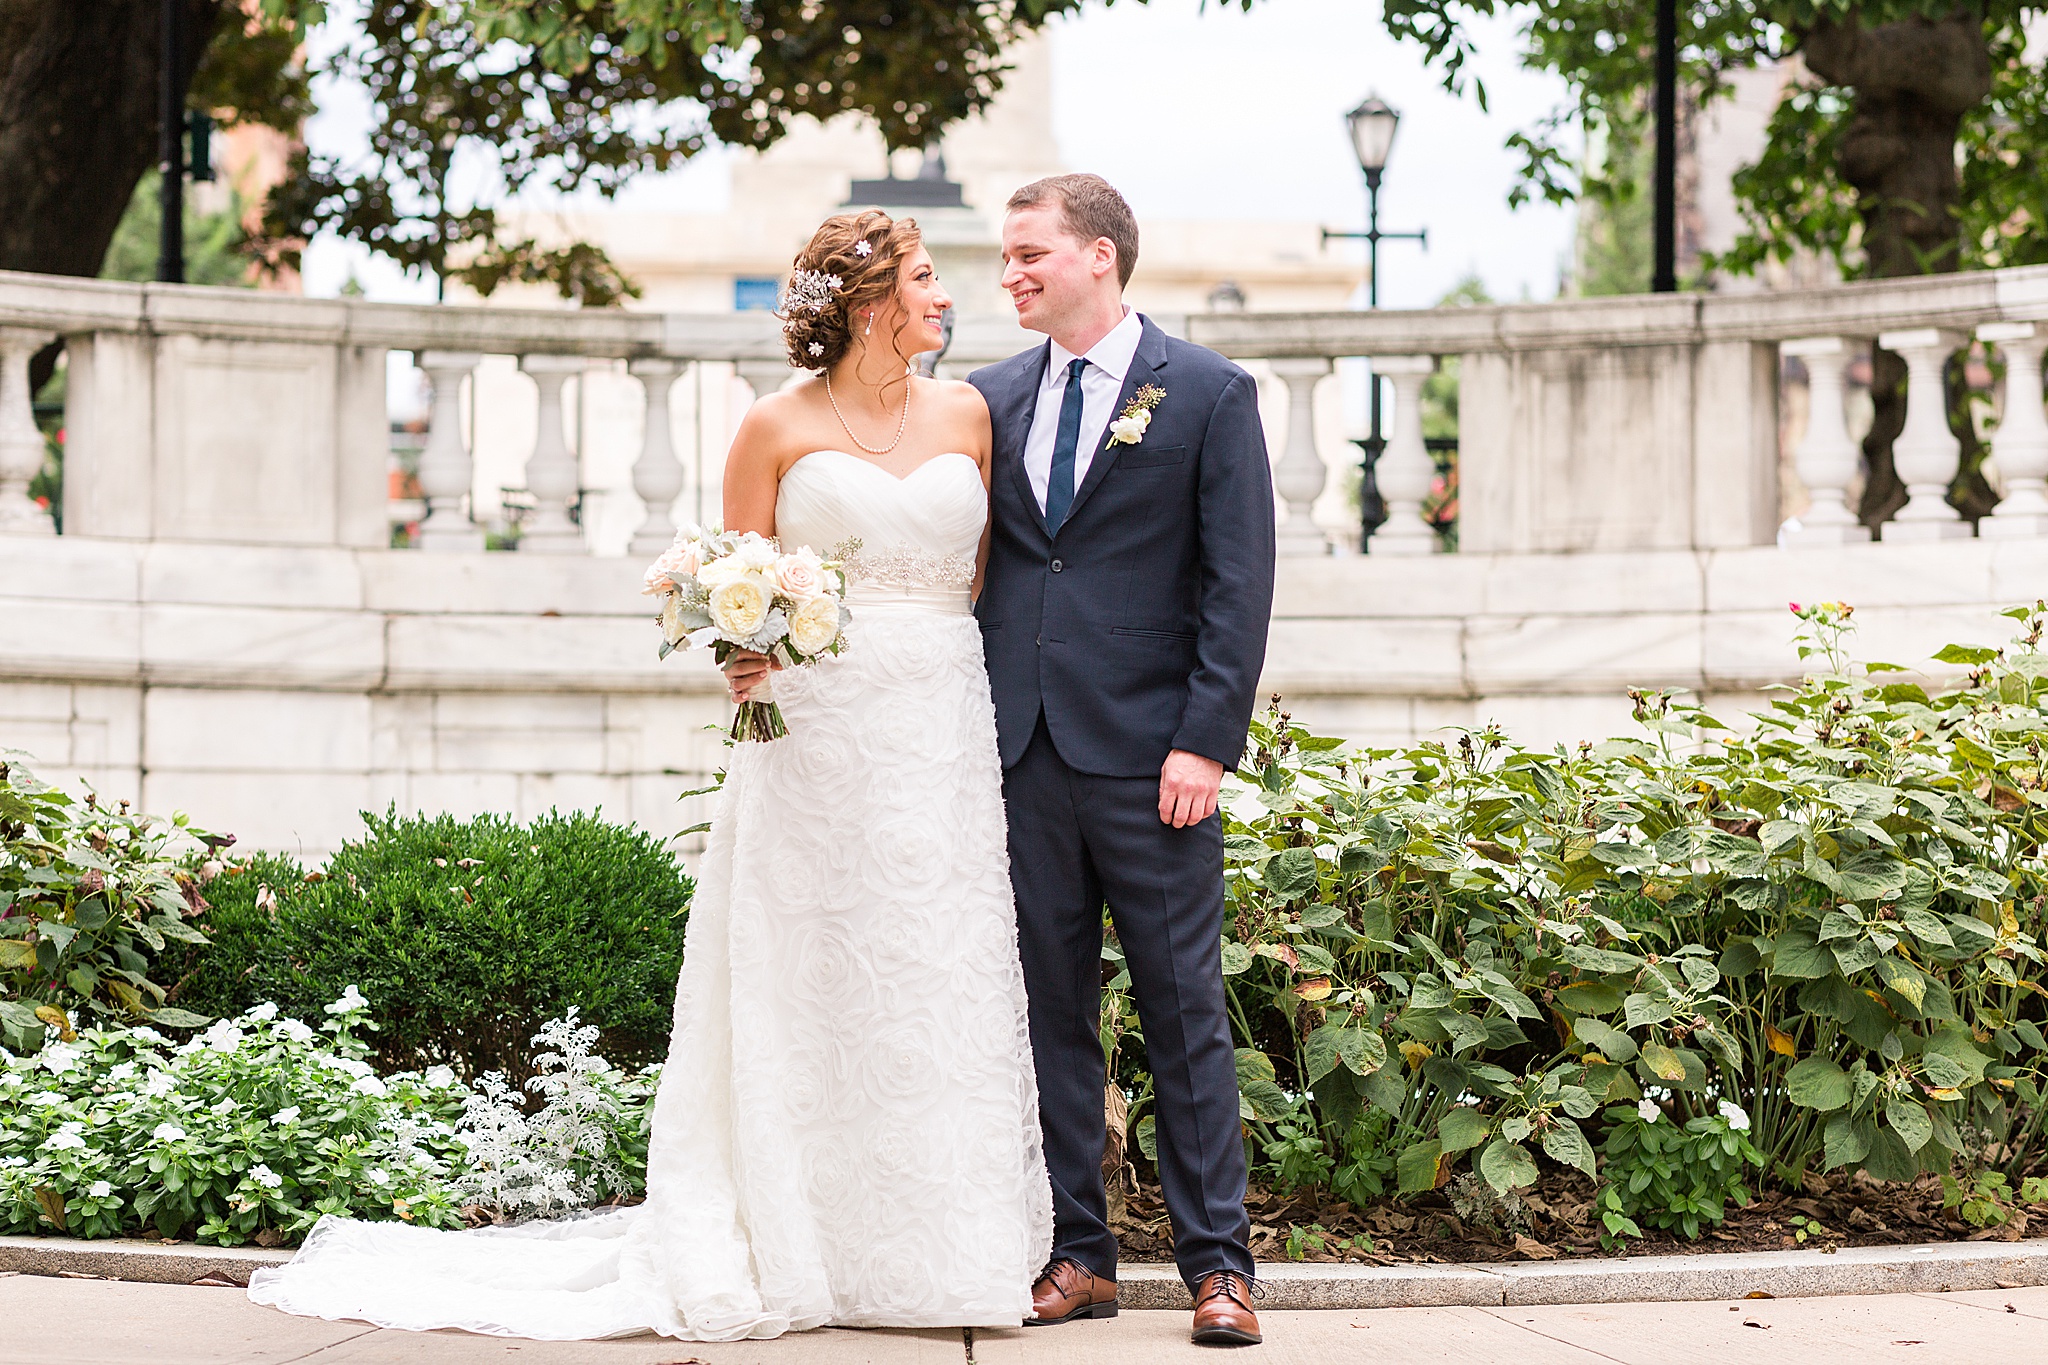 MD wedding first look photographed by Alexandra Mandato Photography